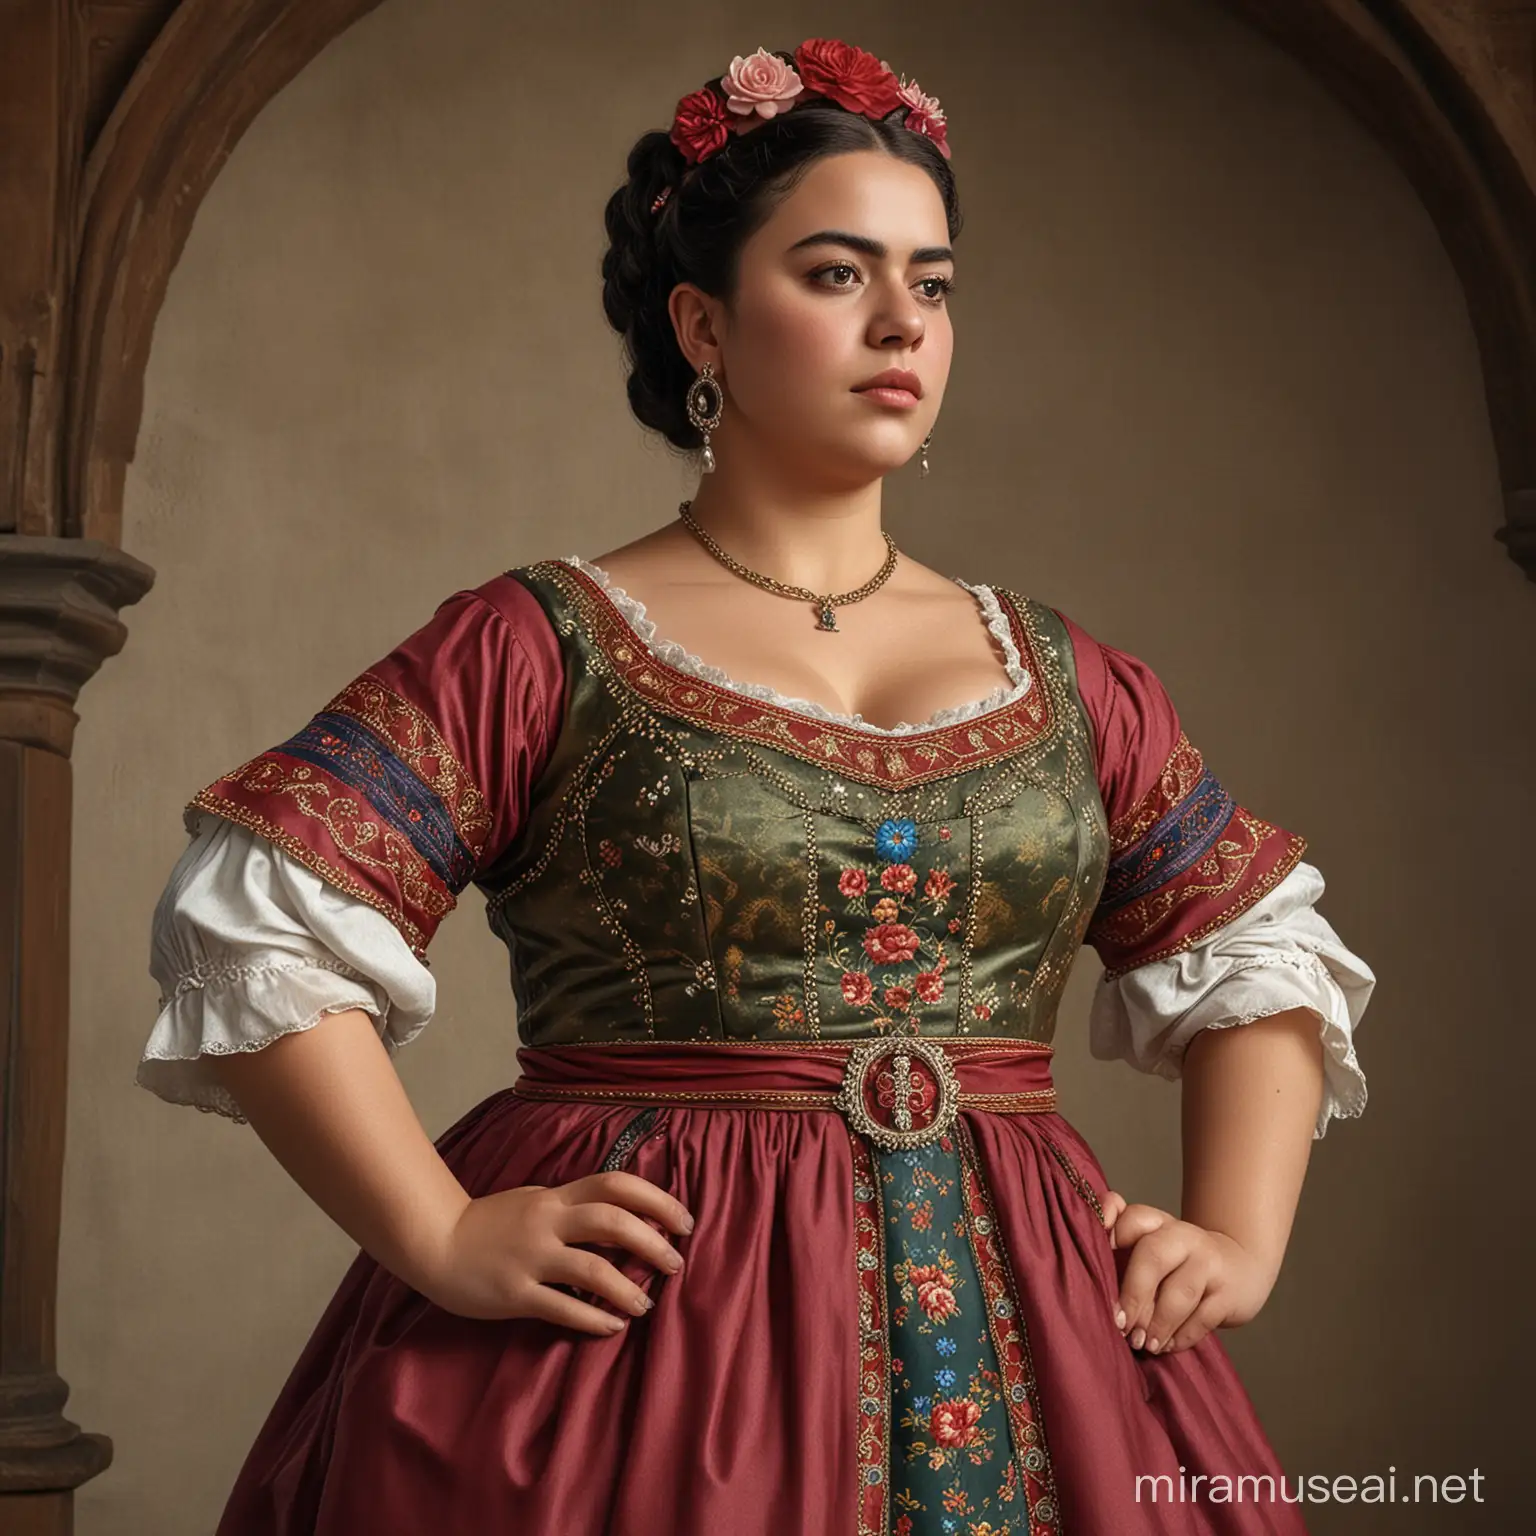 Realistic Portrait of Chubby Frida Coelho in Tight Medieval Dress